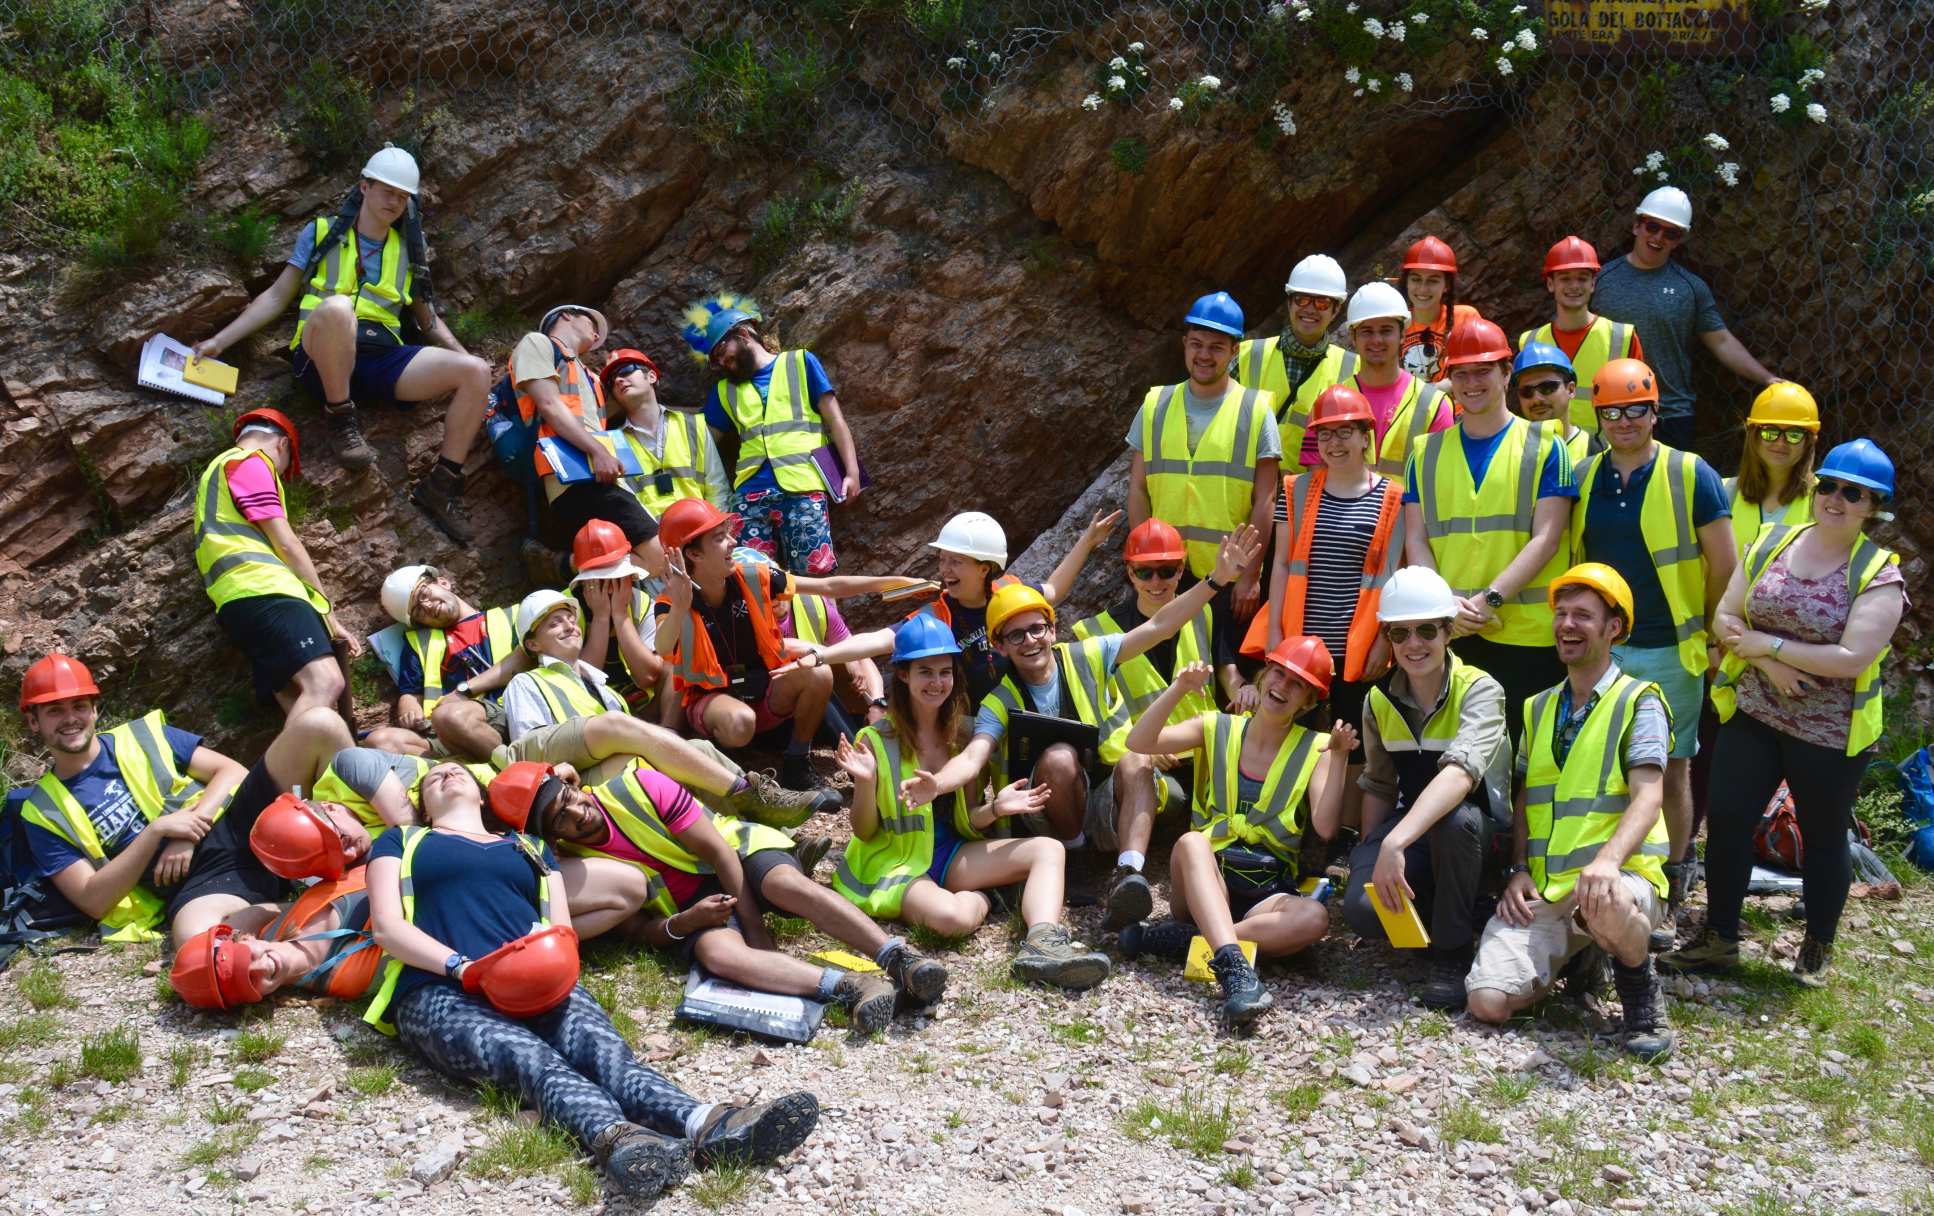 Fourth year students in the Appenines pose for a group photo in their fluorescent vests and hard hats.